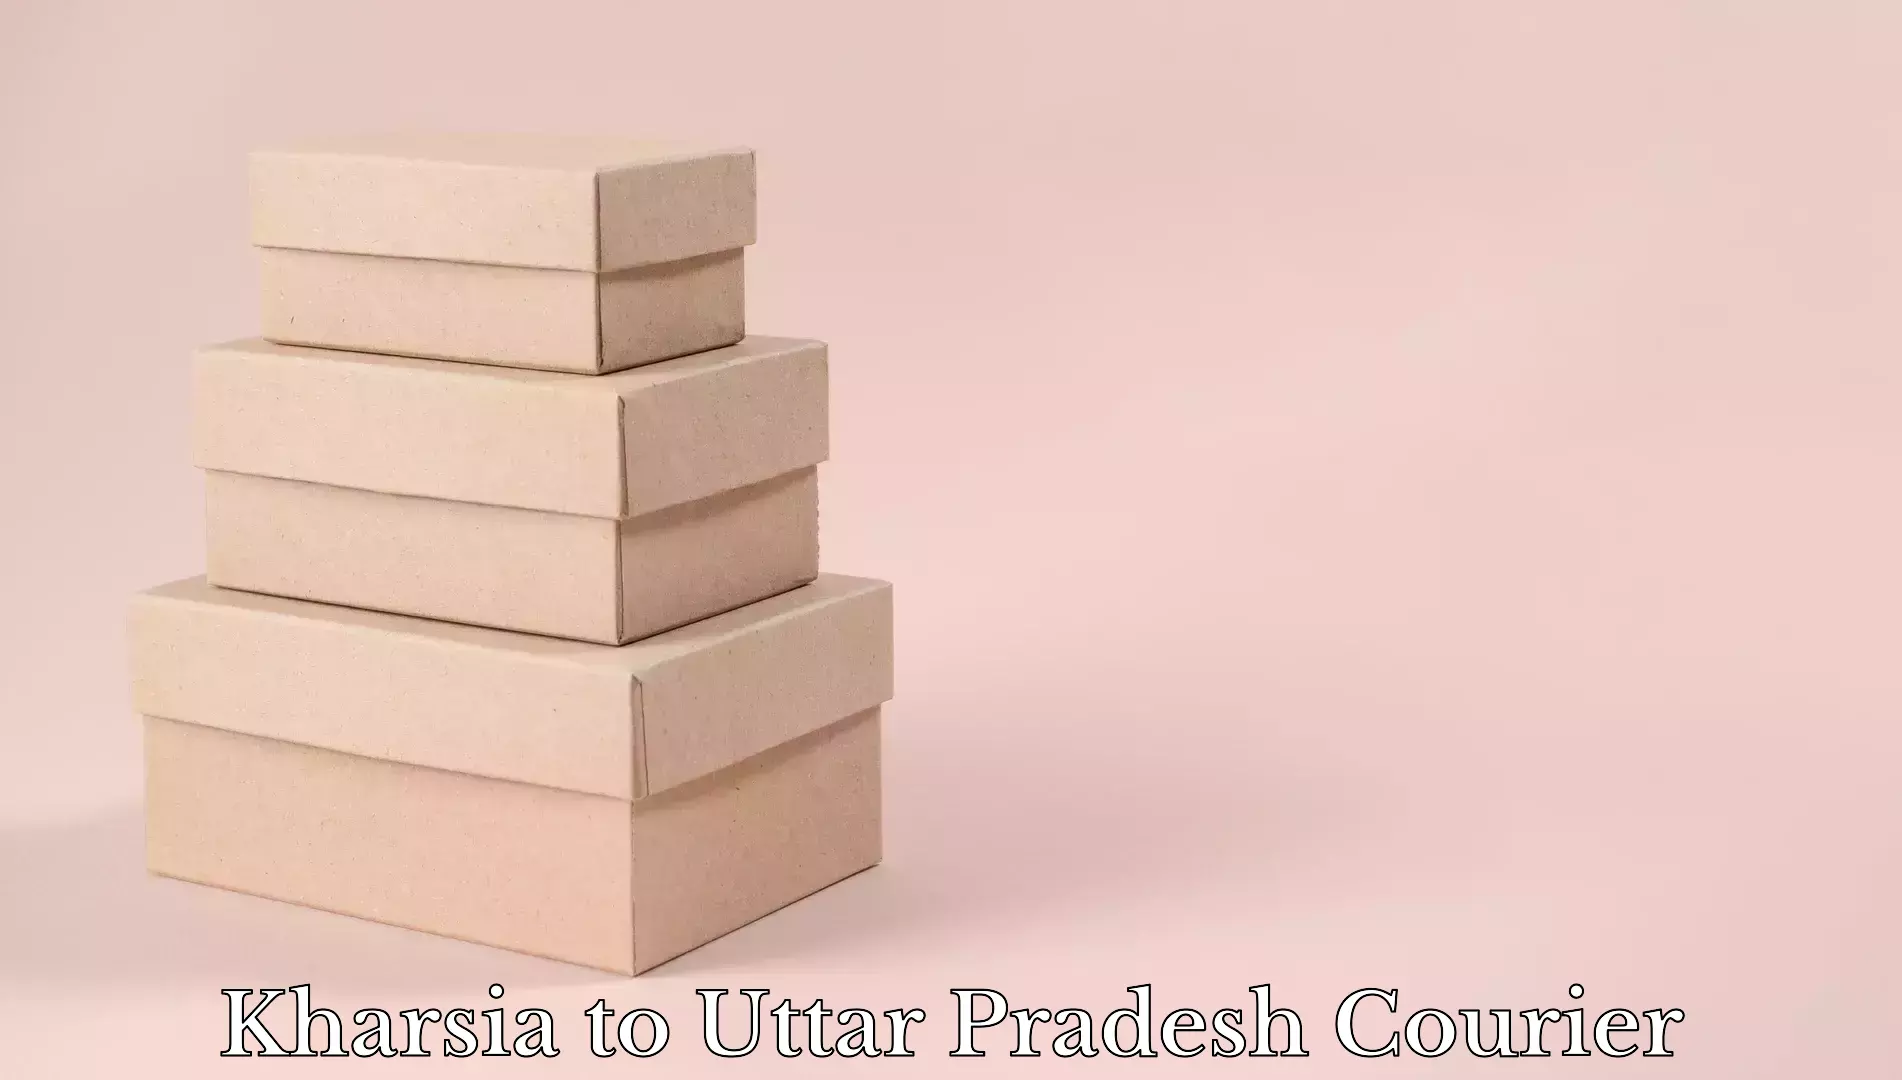 Baggage shipping service Kharsia to Lucknow